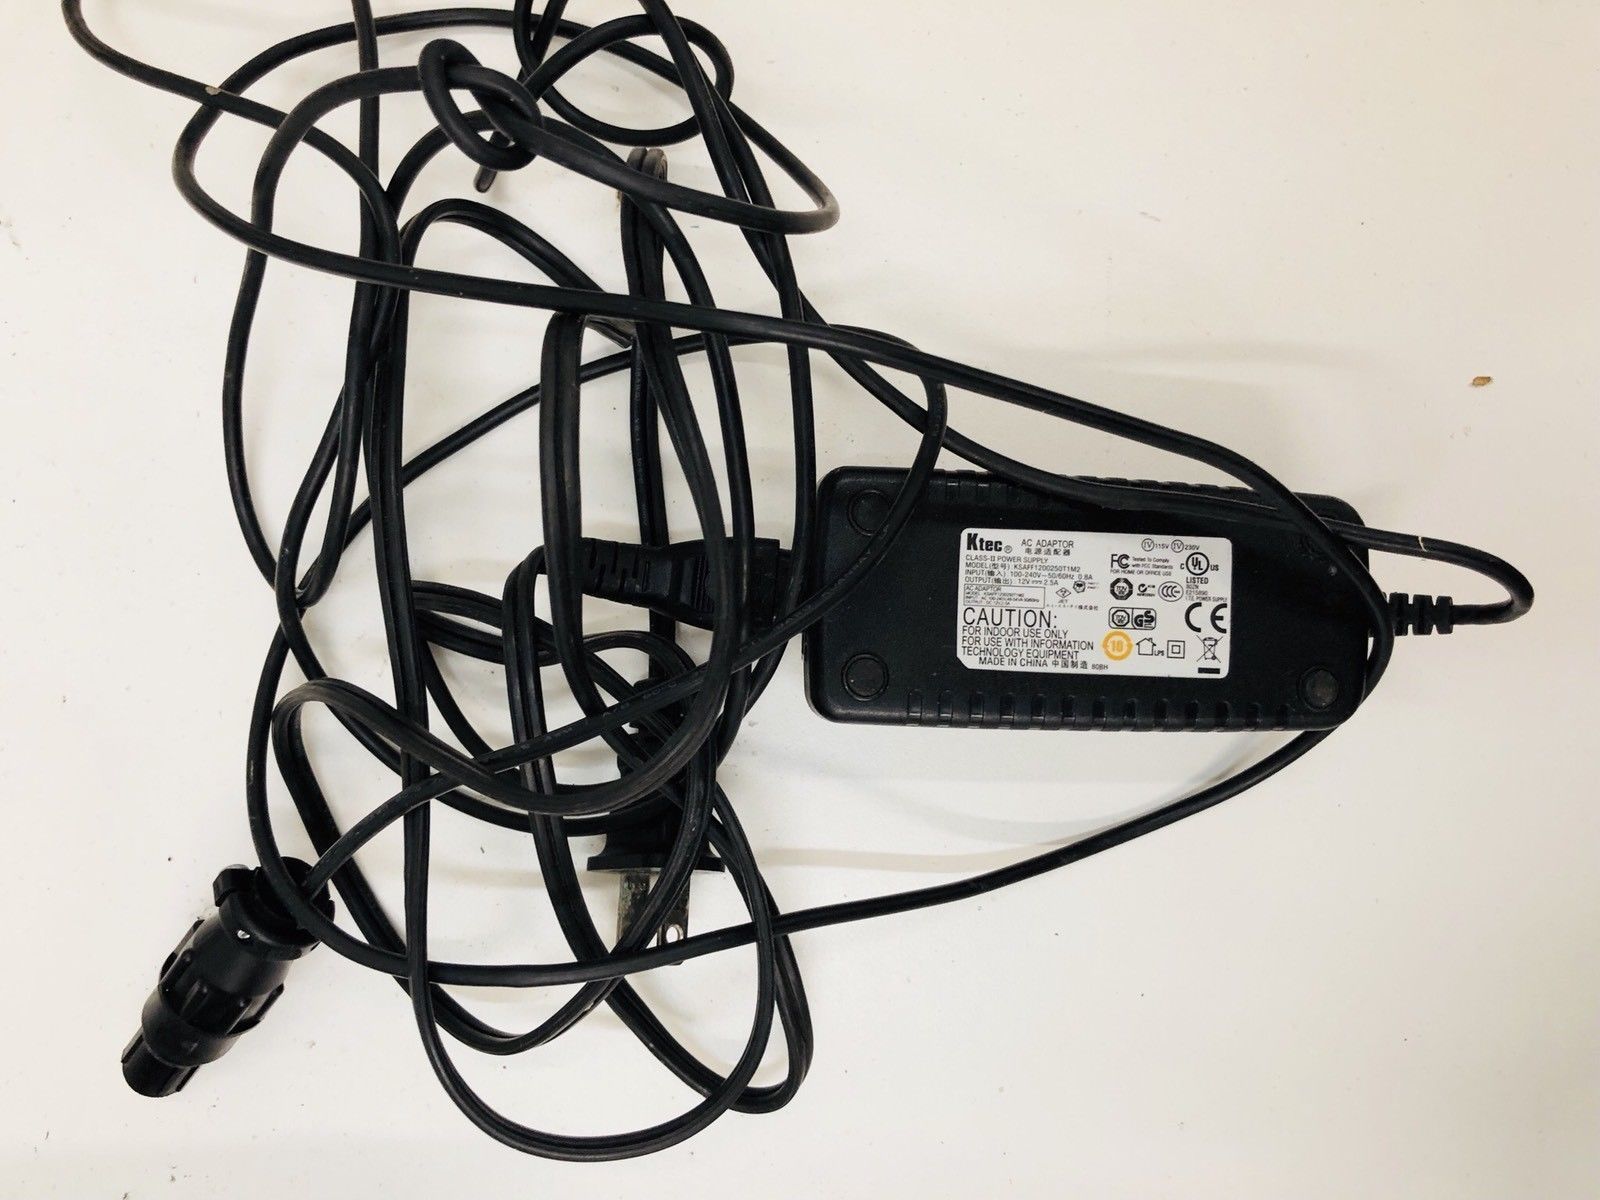 2 pin AC Adapter Power Supply Adapter Cord Pack (Used)